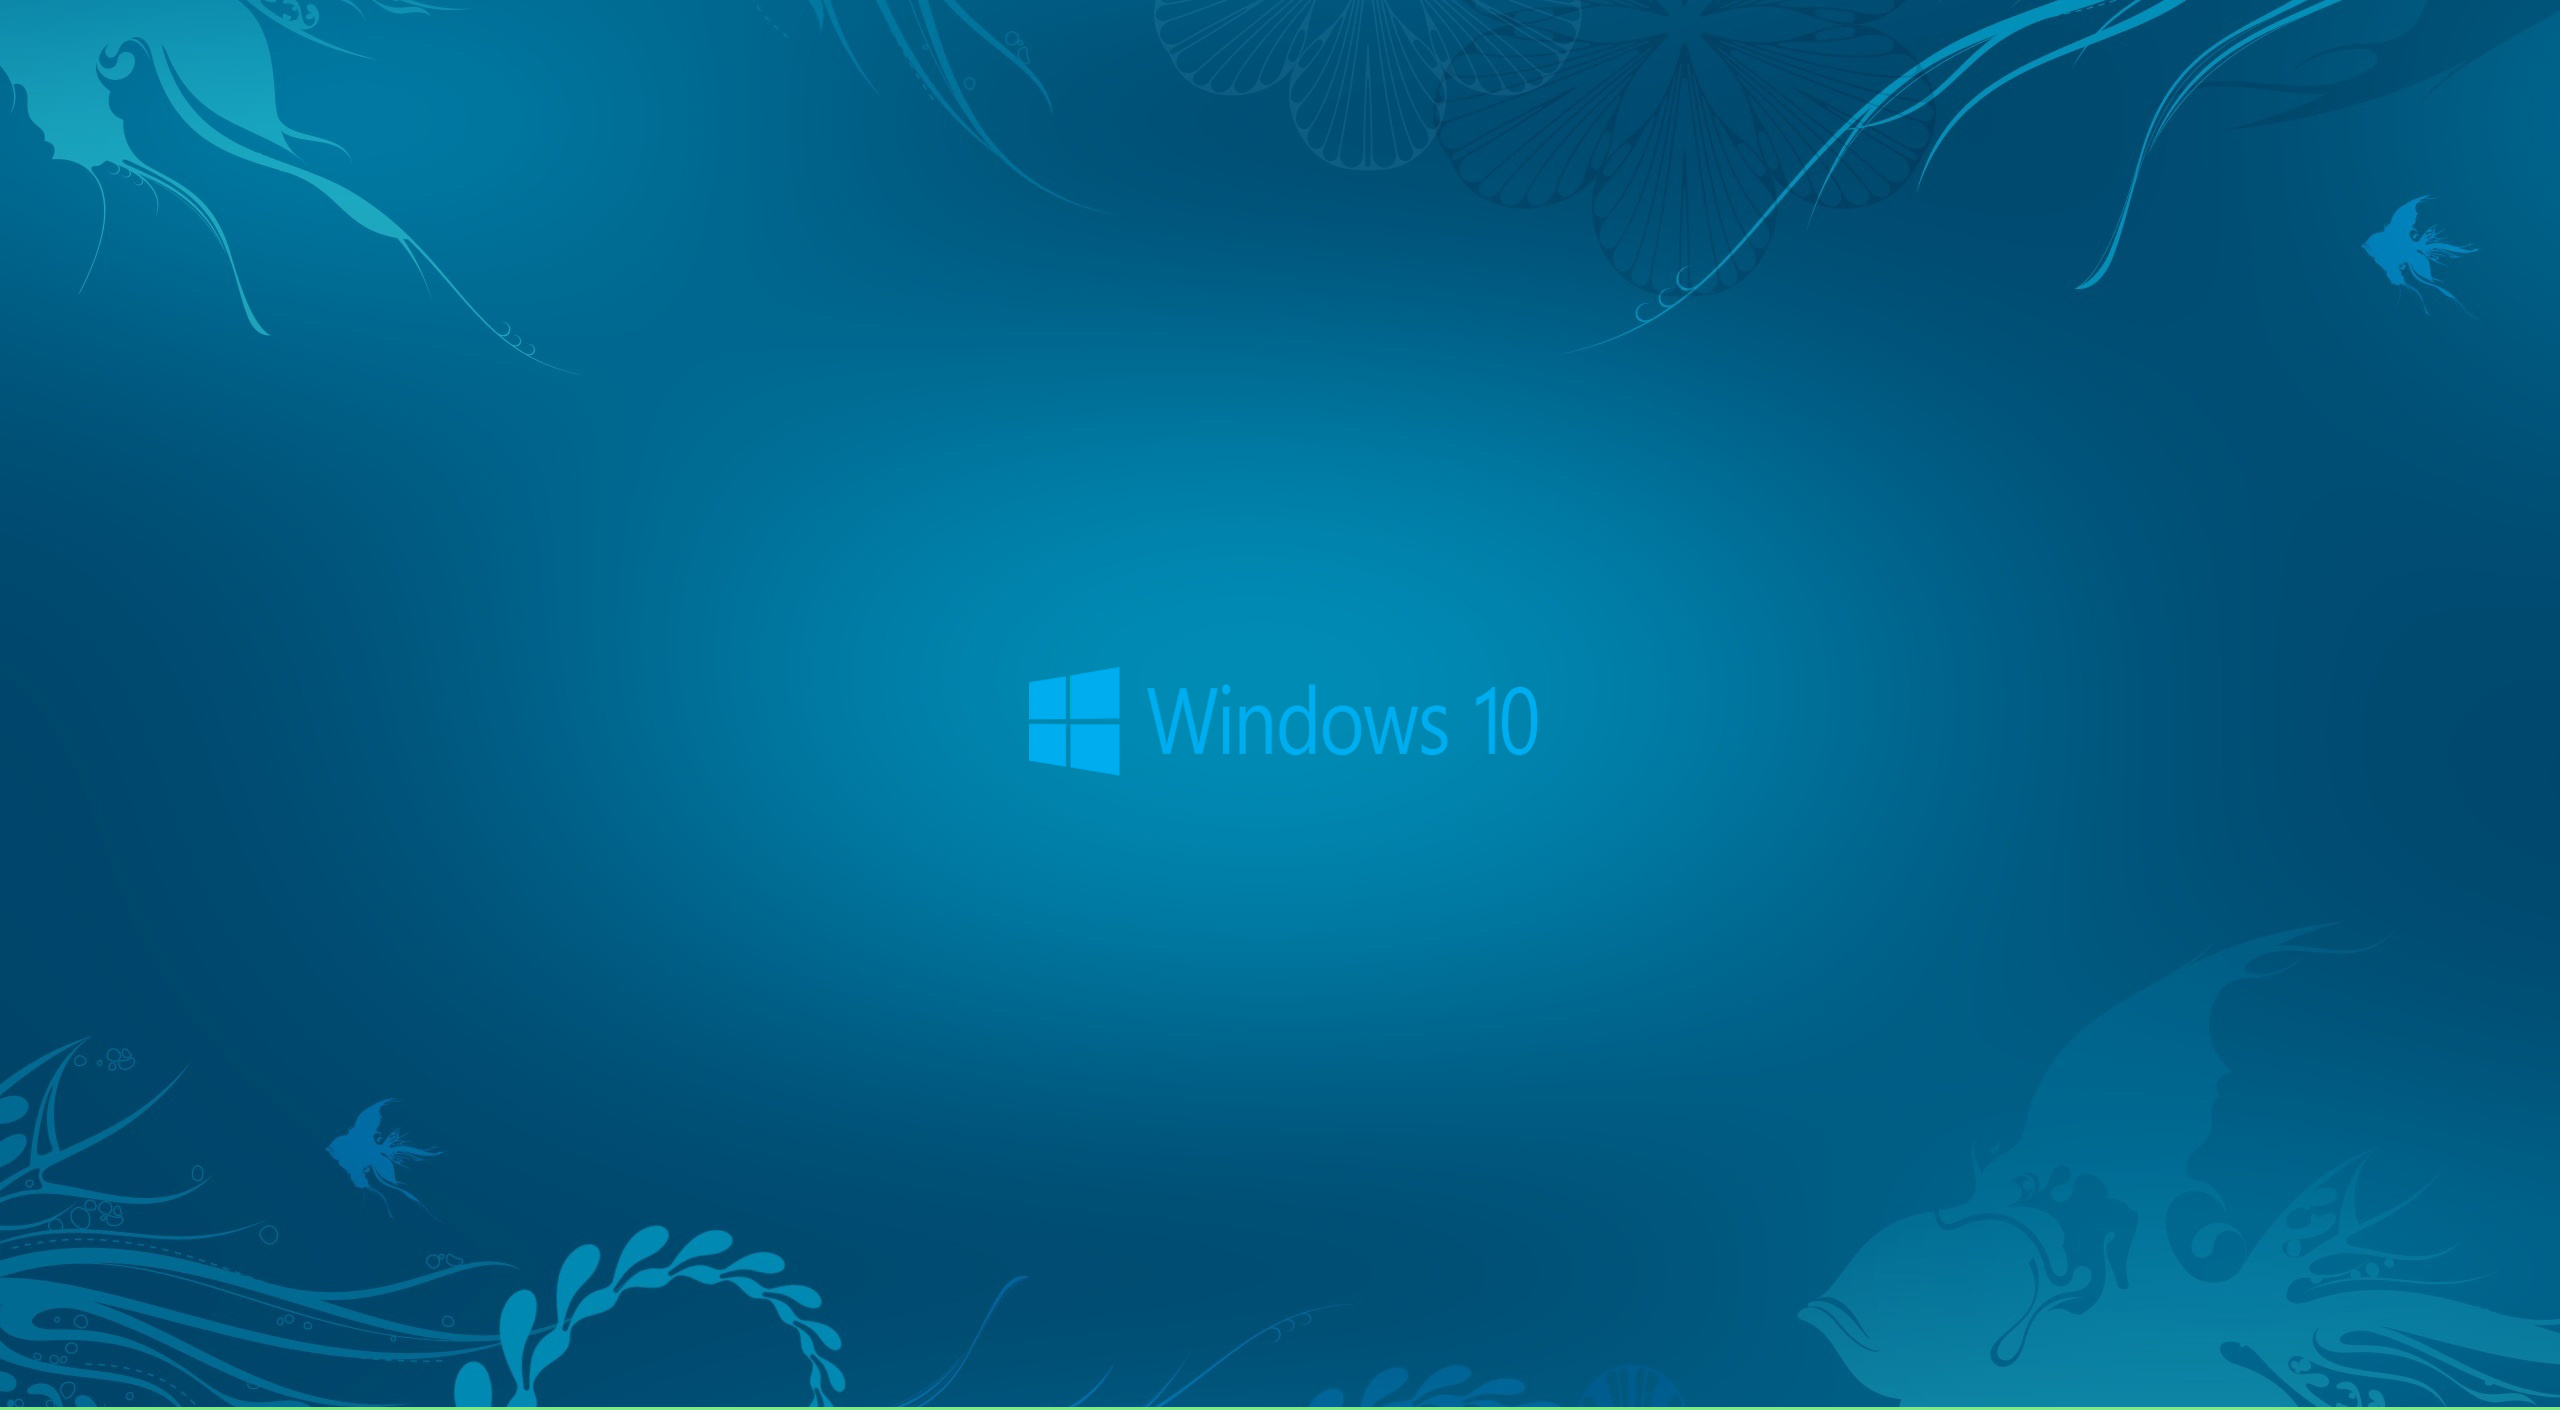 Windows 10 Wallpaper in Abstract Deep Blue See and New Logo HD 2560x1410